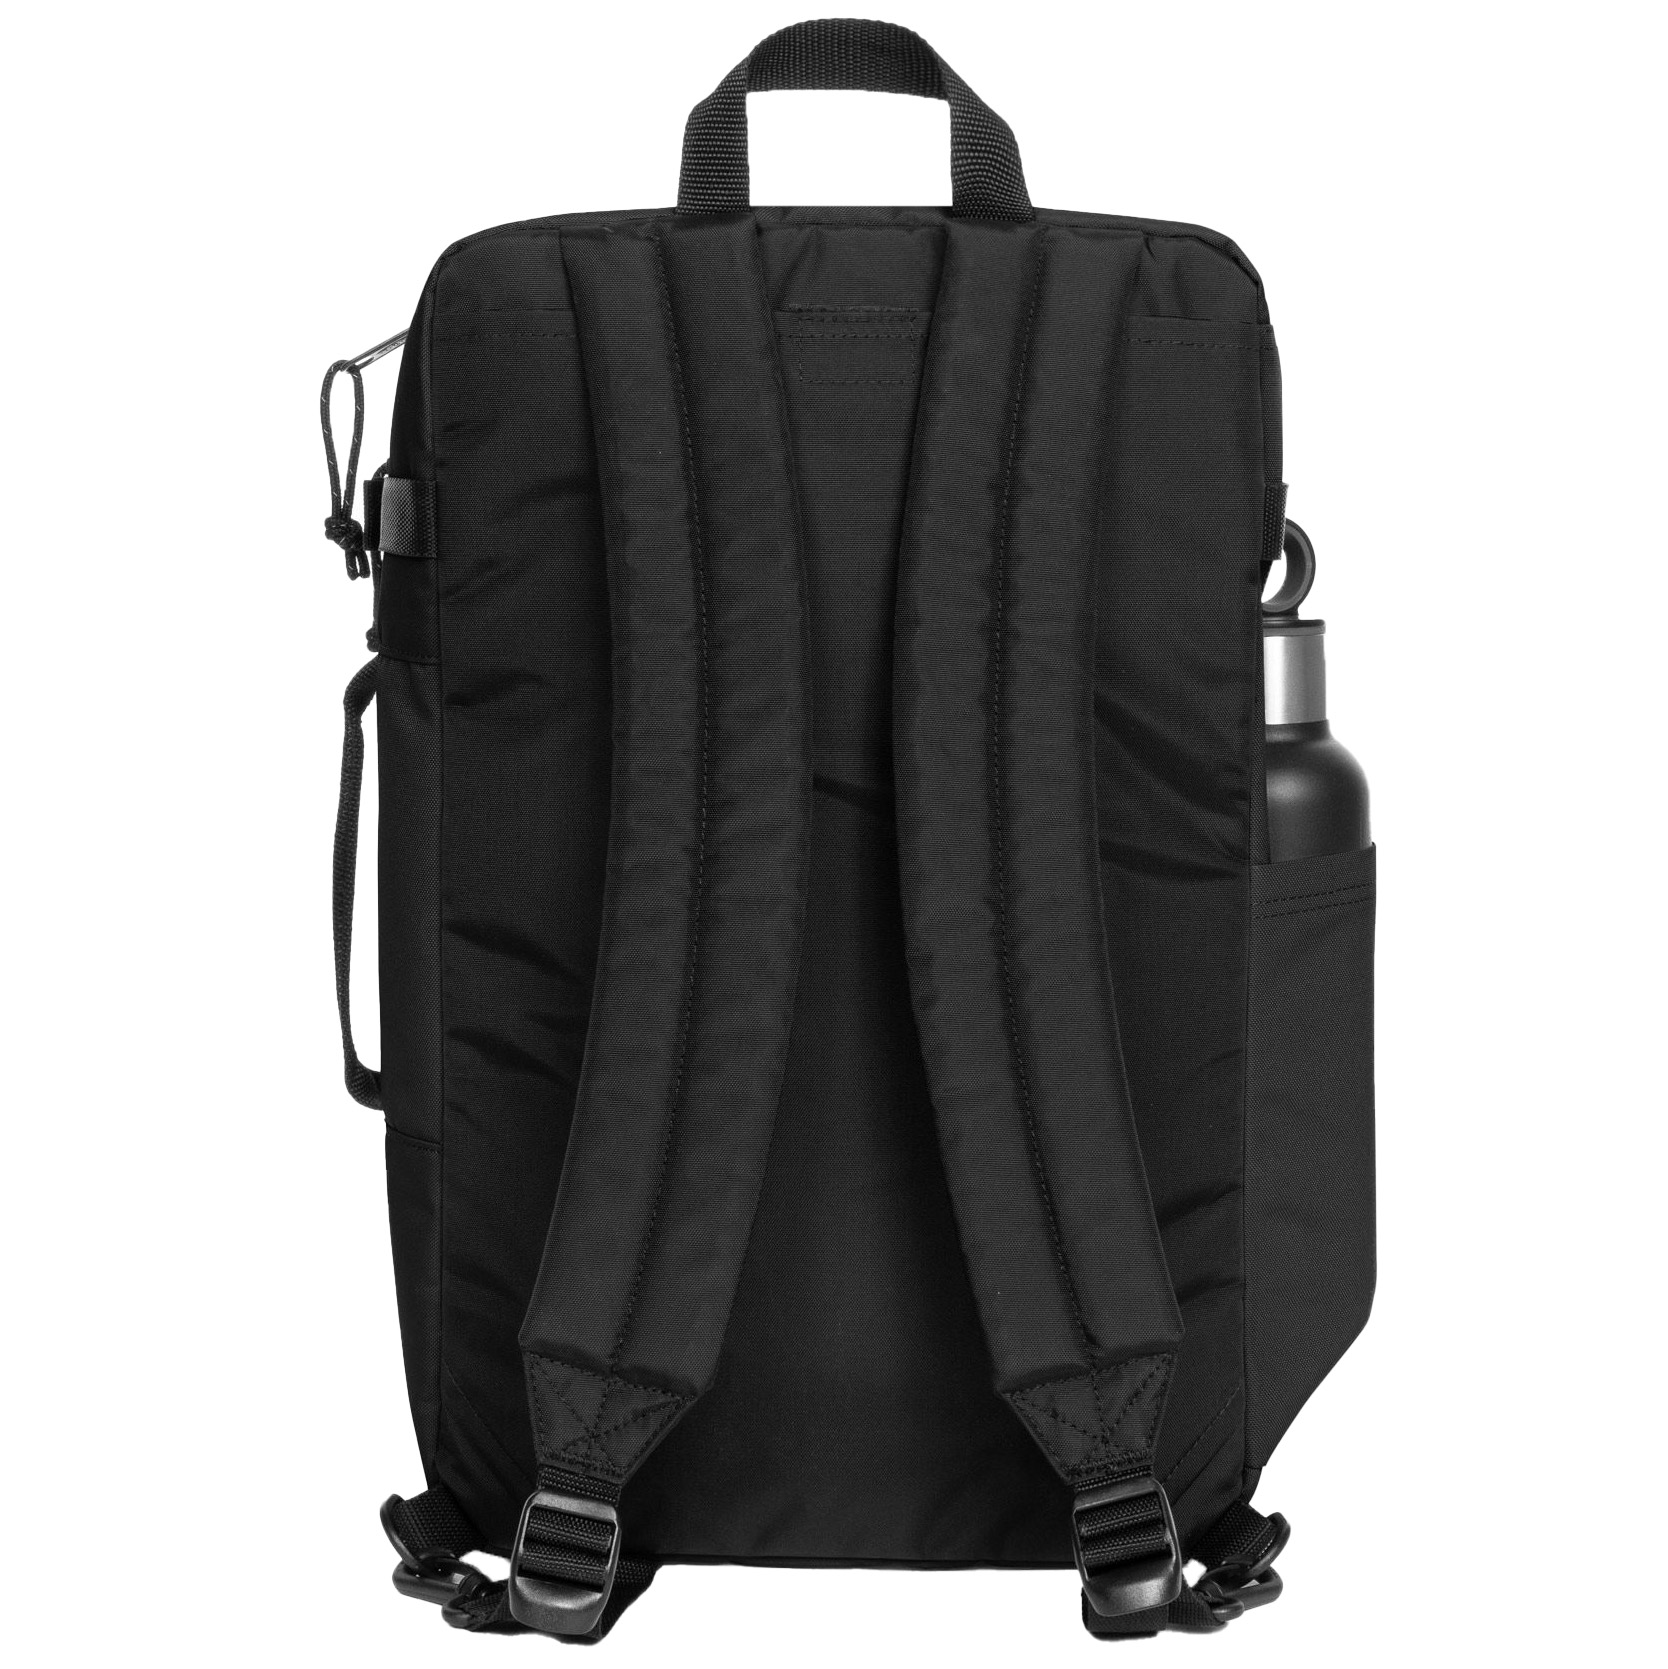 Eastpak Transit'r Compact Day Backpack